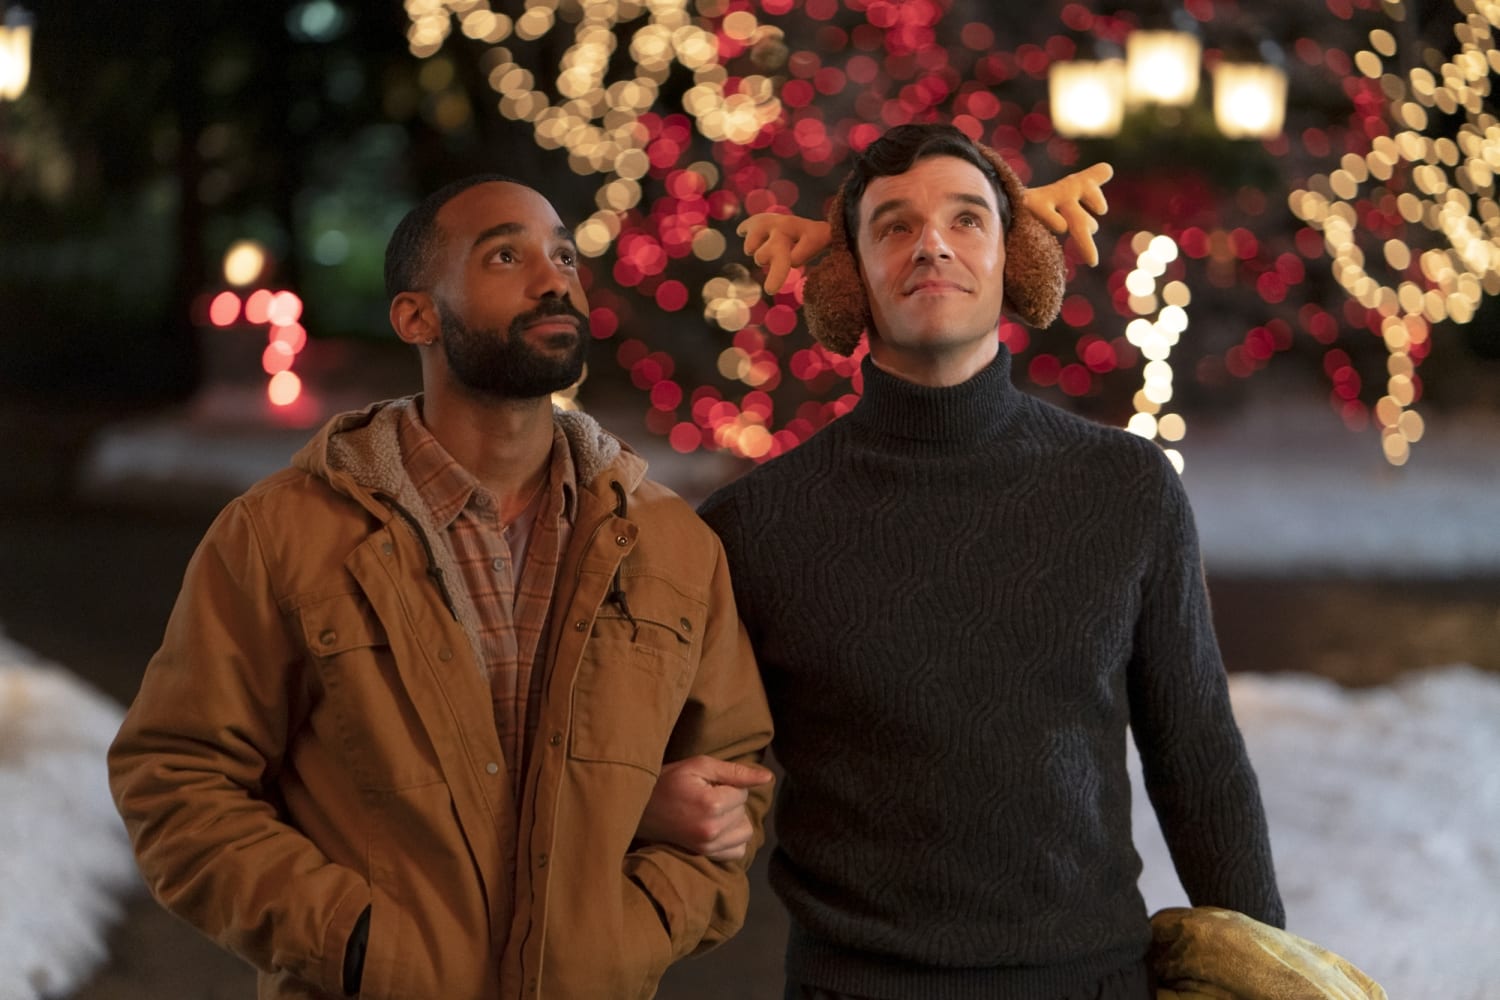 Make the Yuletide gay with these new queer holiday movies